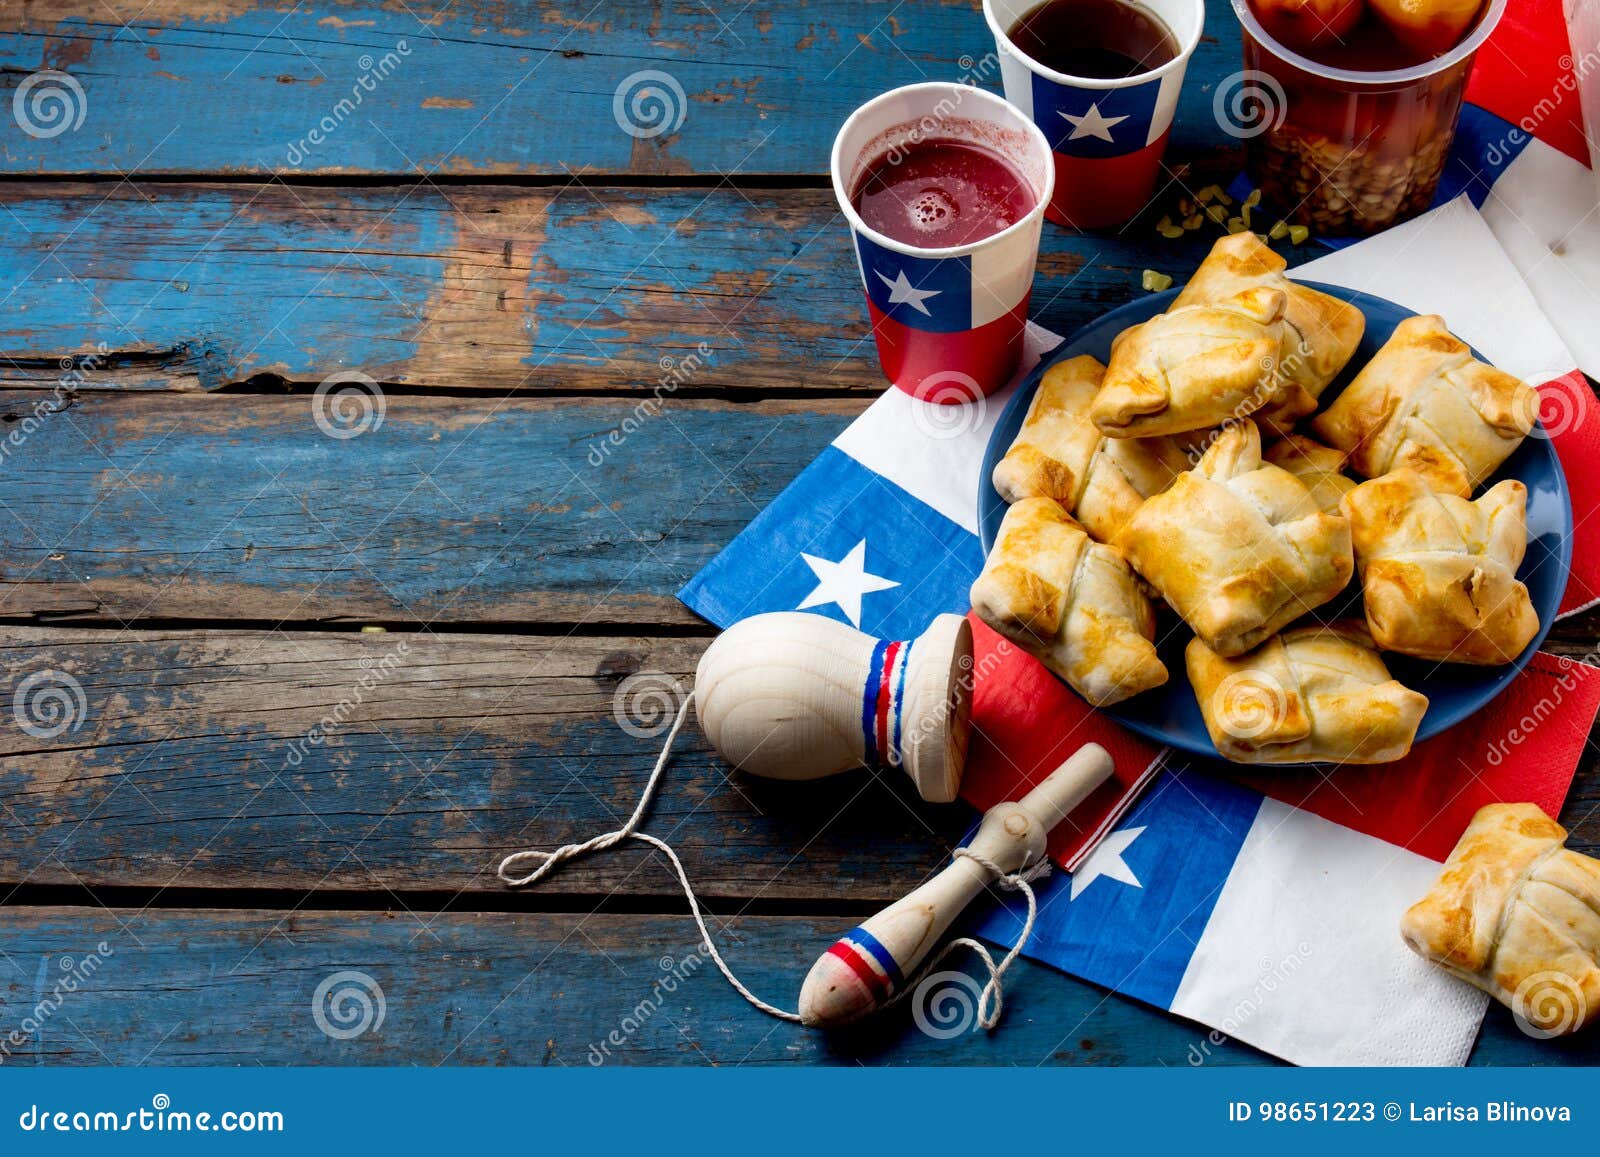 chilean independence day concept. fiestas patrias. chilean typical dish and drink on independence day party, 18